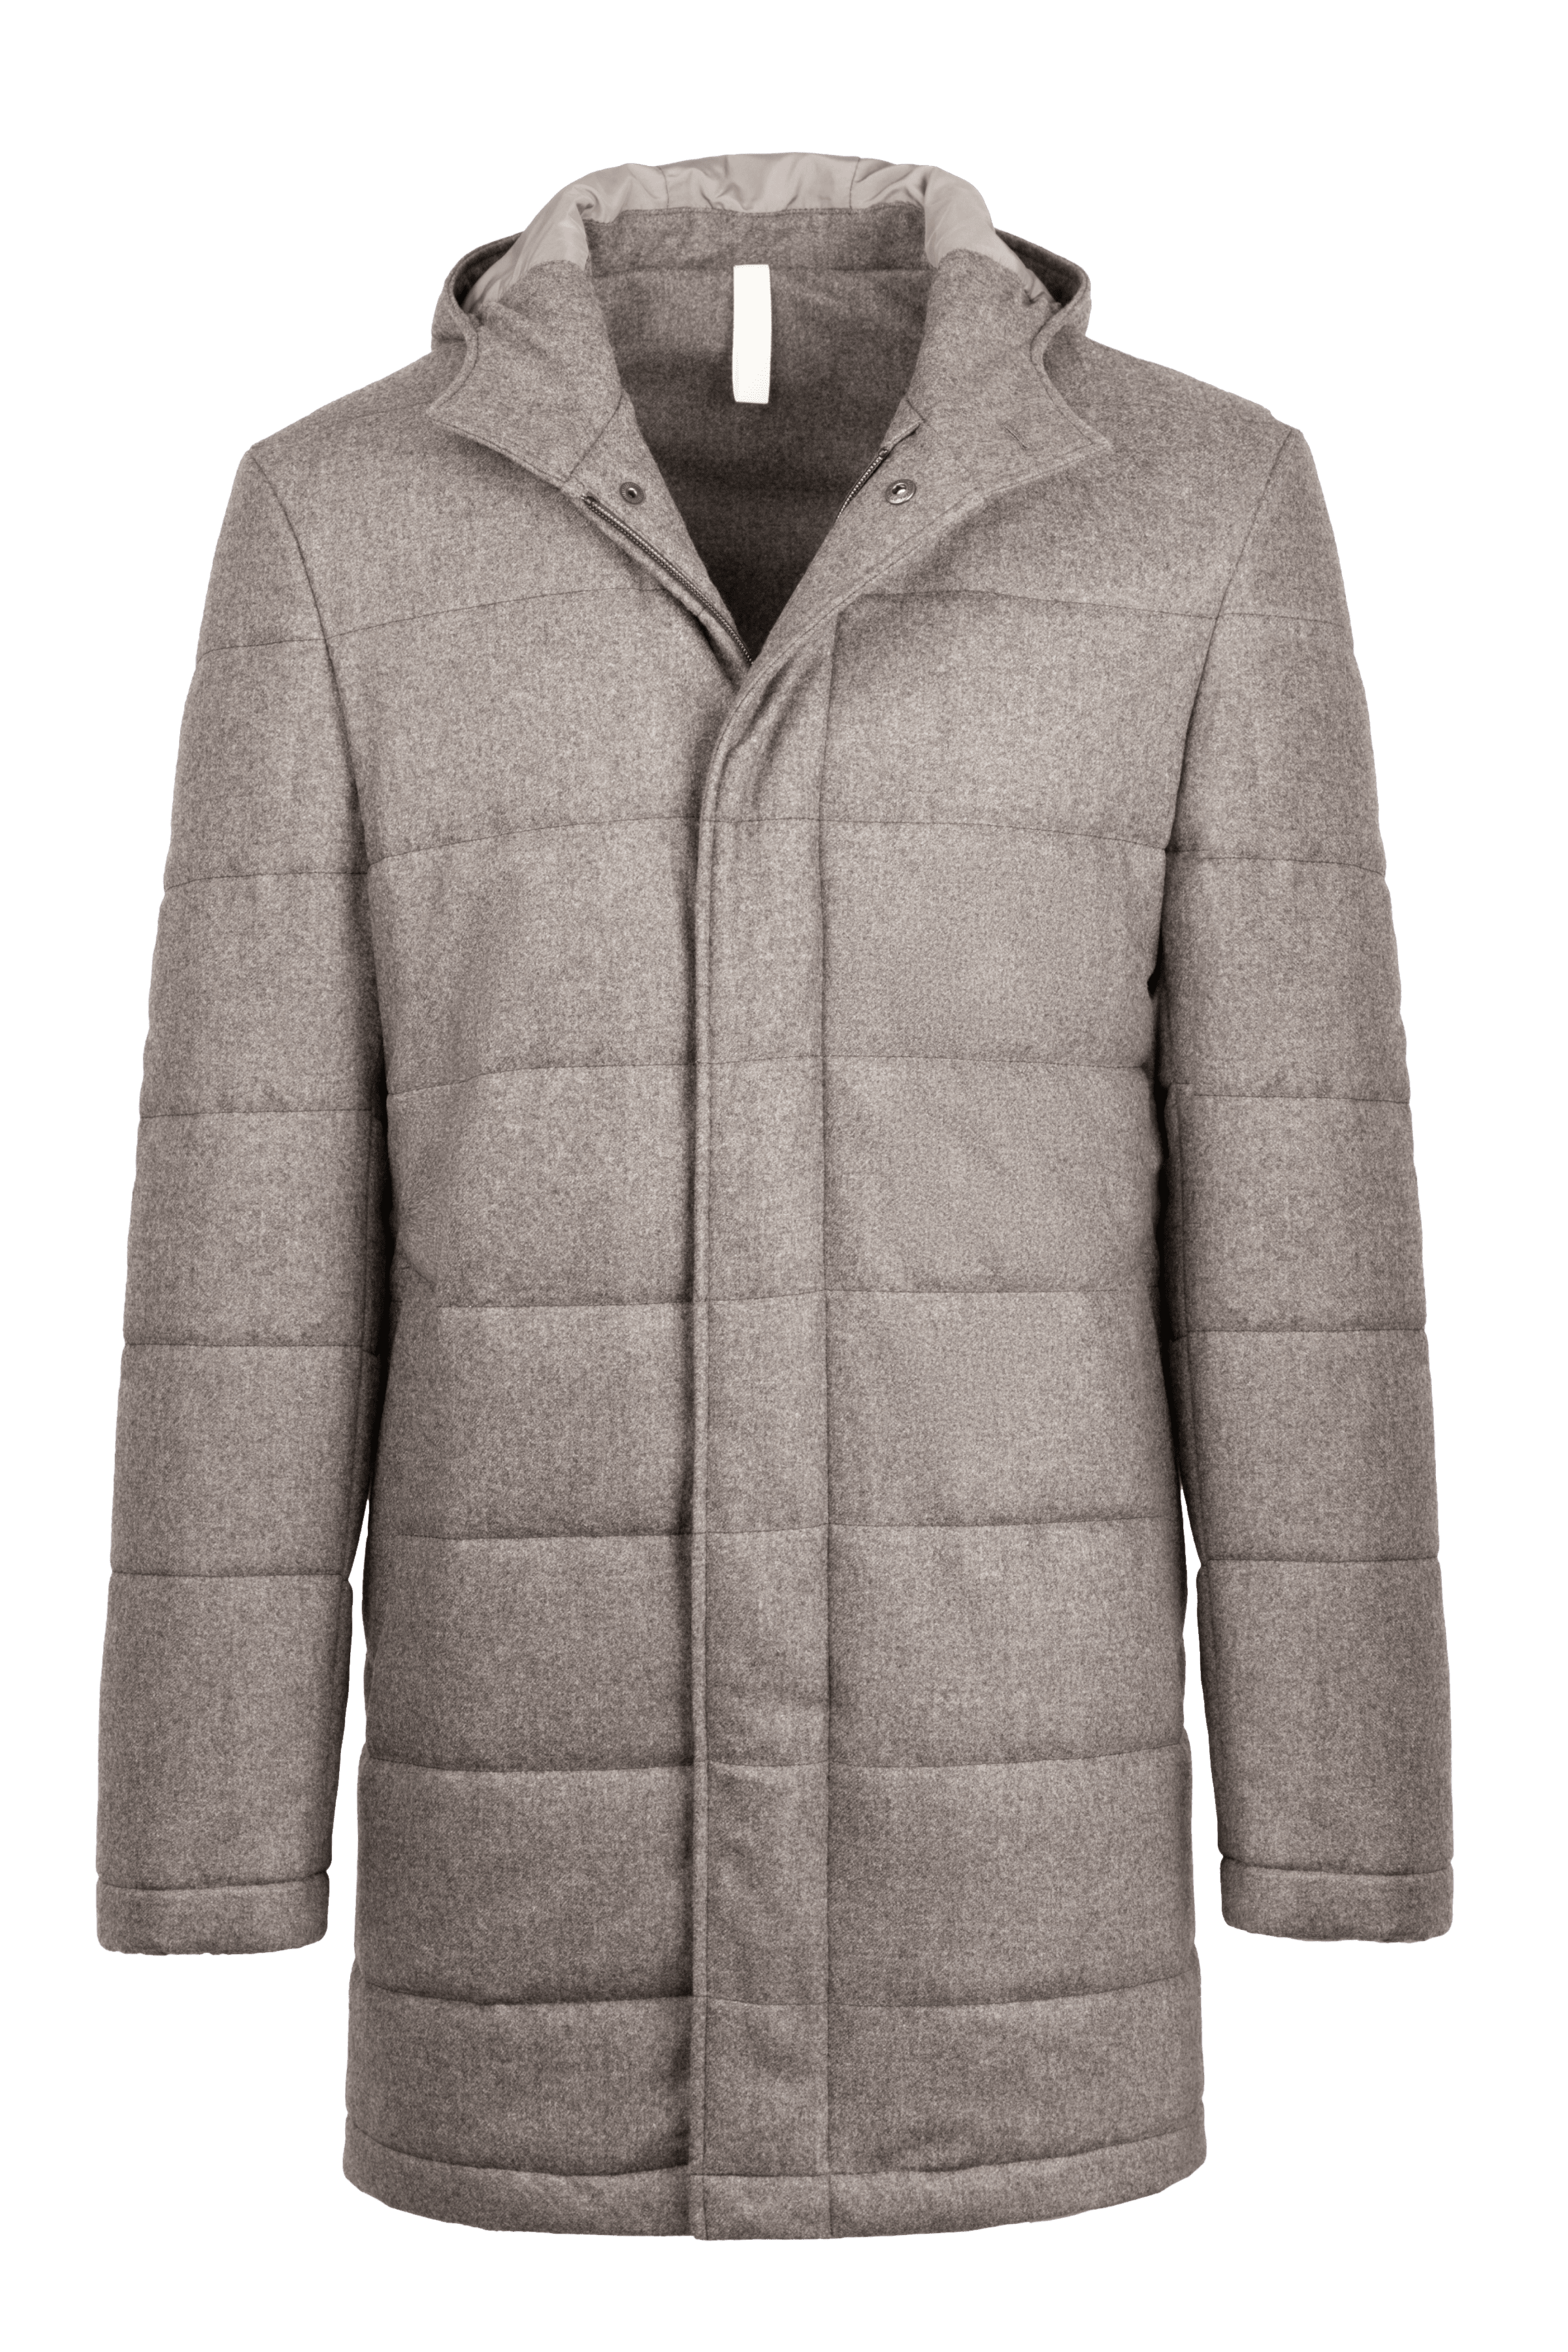 Four Seasons Coats, Jackets & Outerwear, About Us